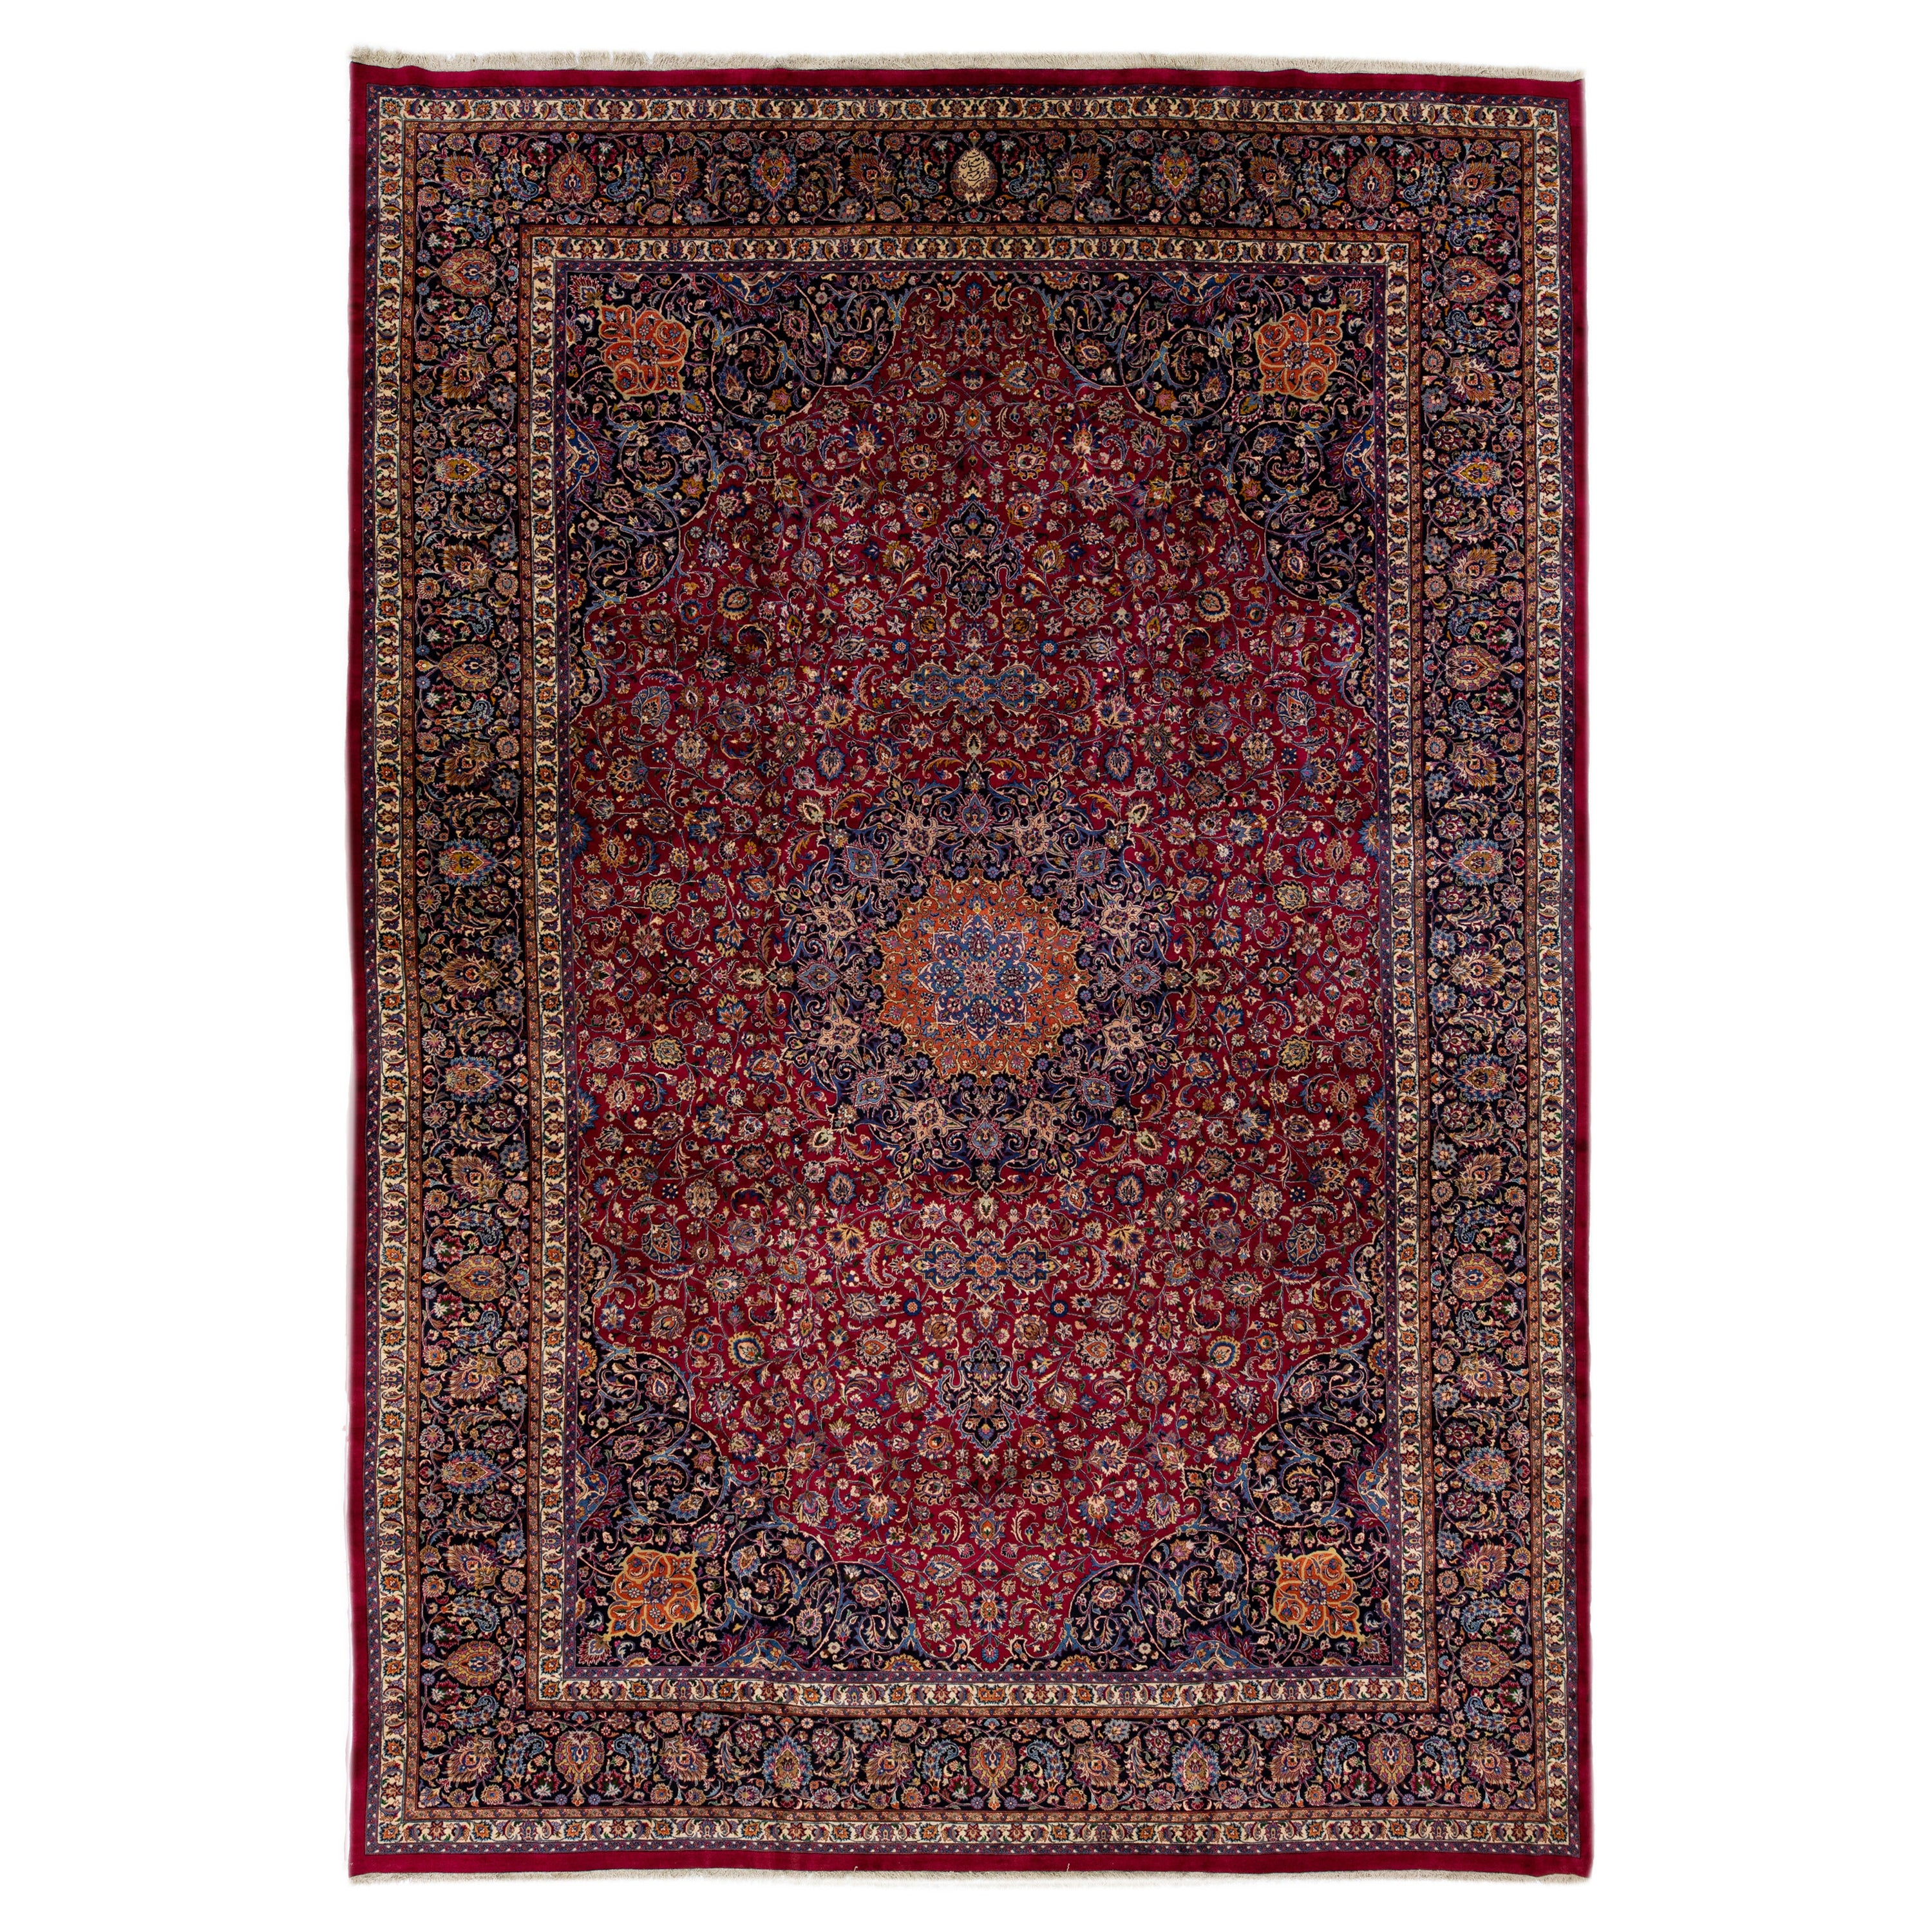 Antique Persian Mashad Handmade Red Oversize Wool Rug with Rosette Motif 